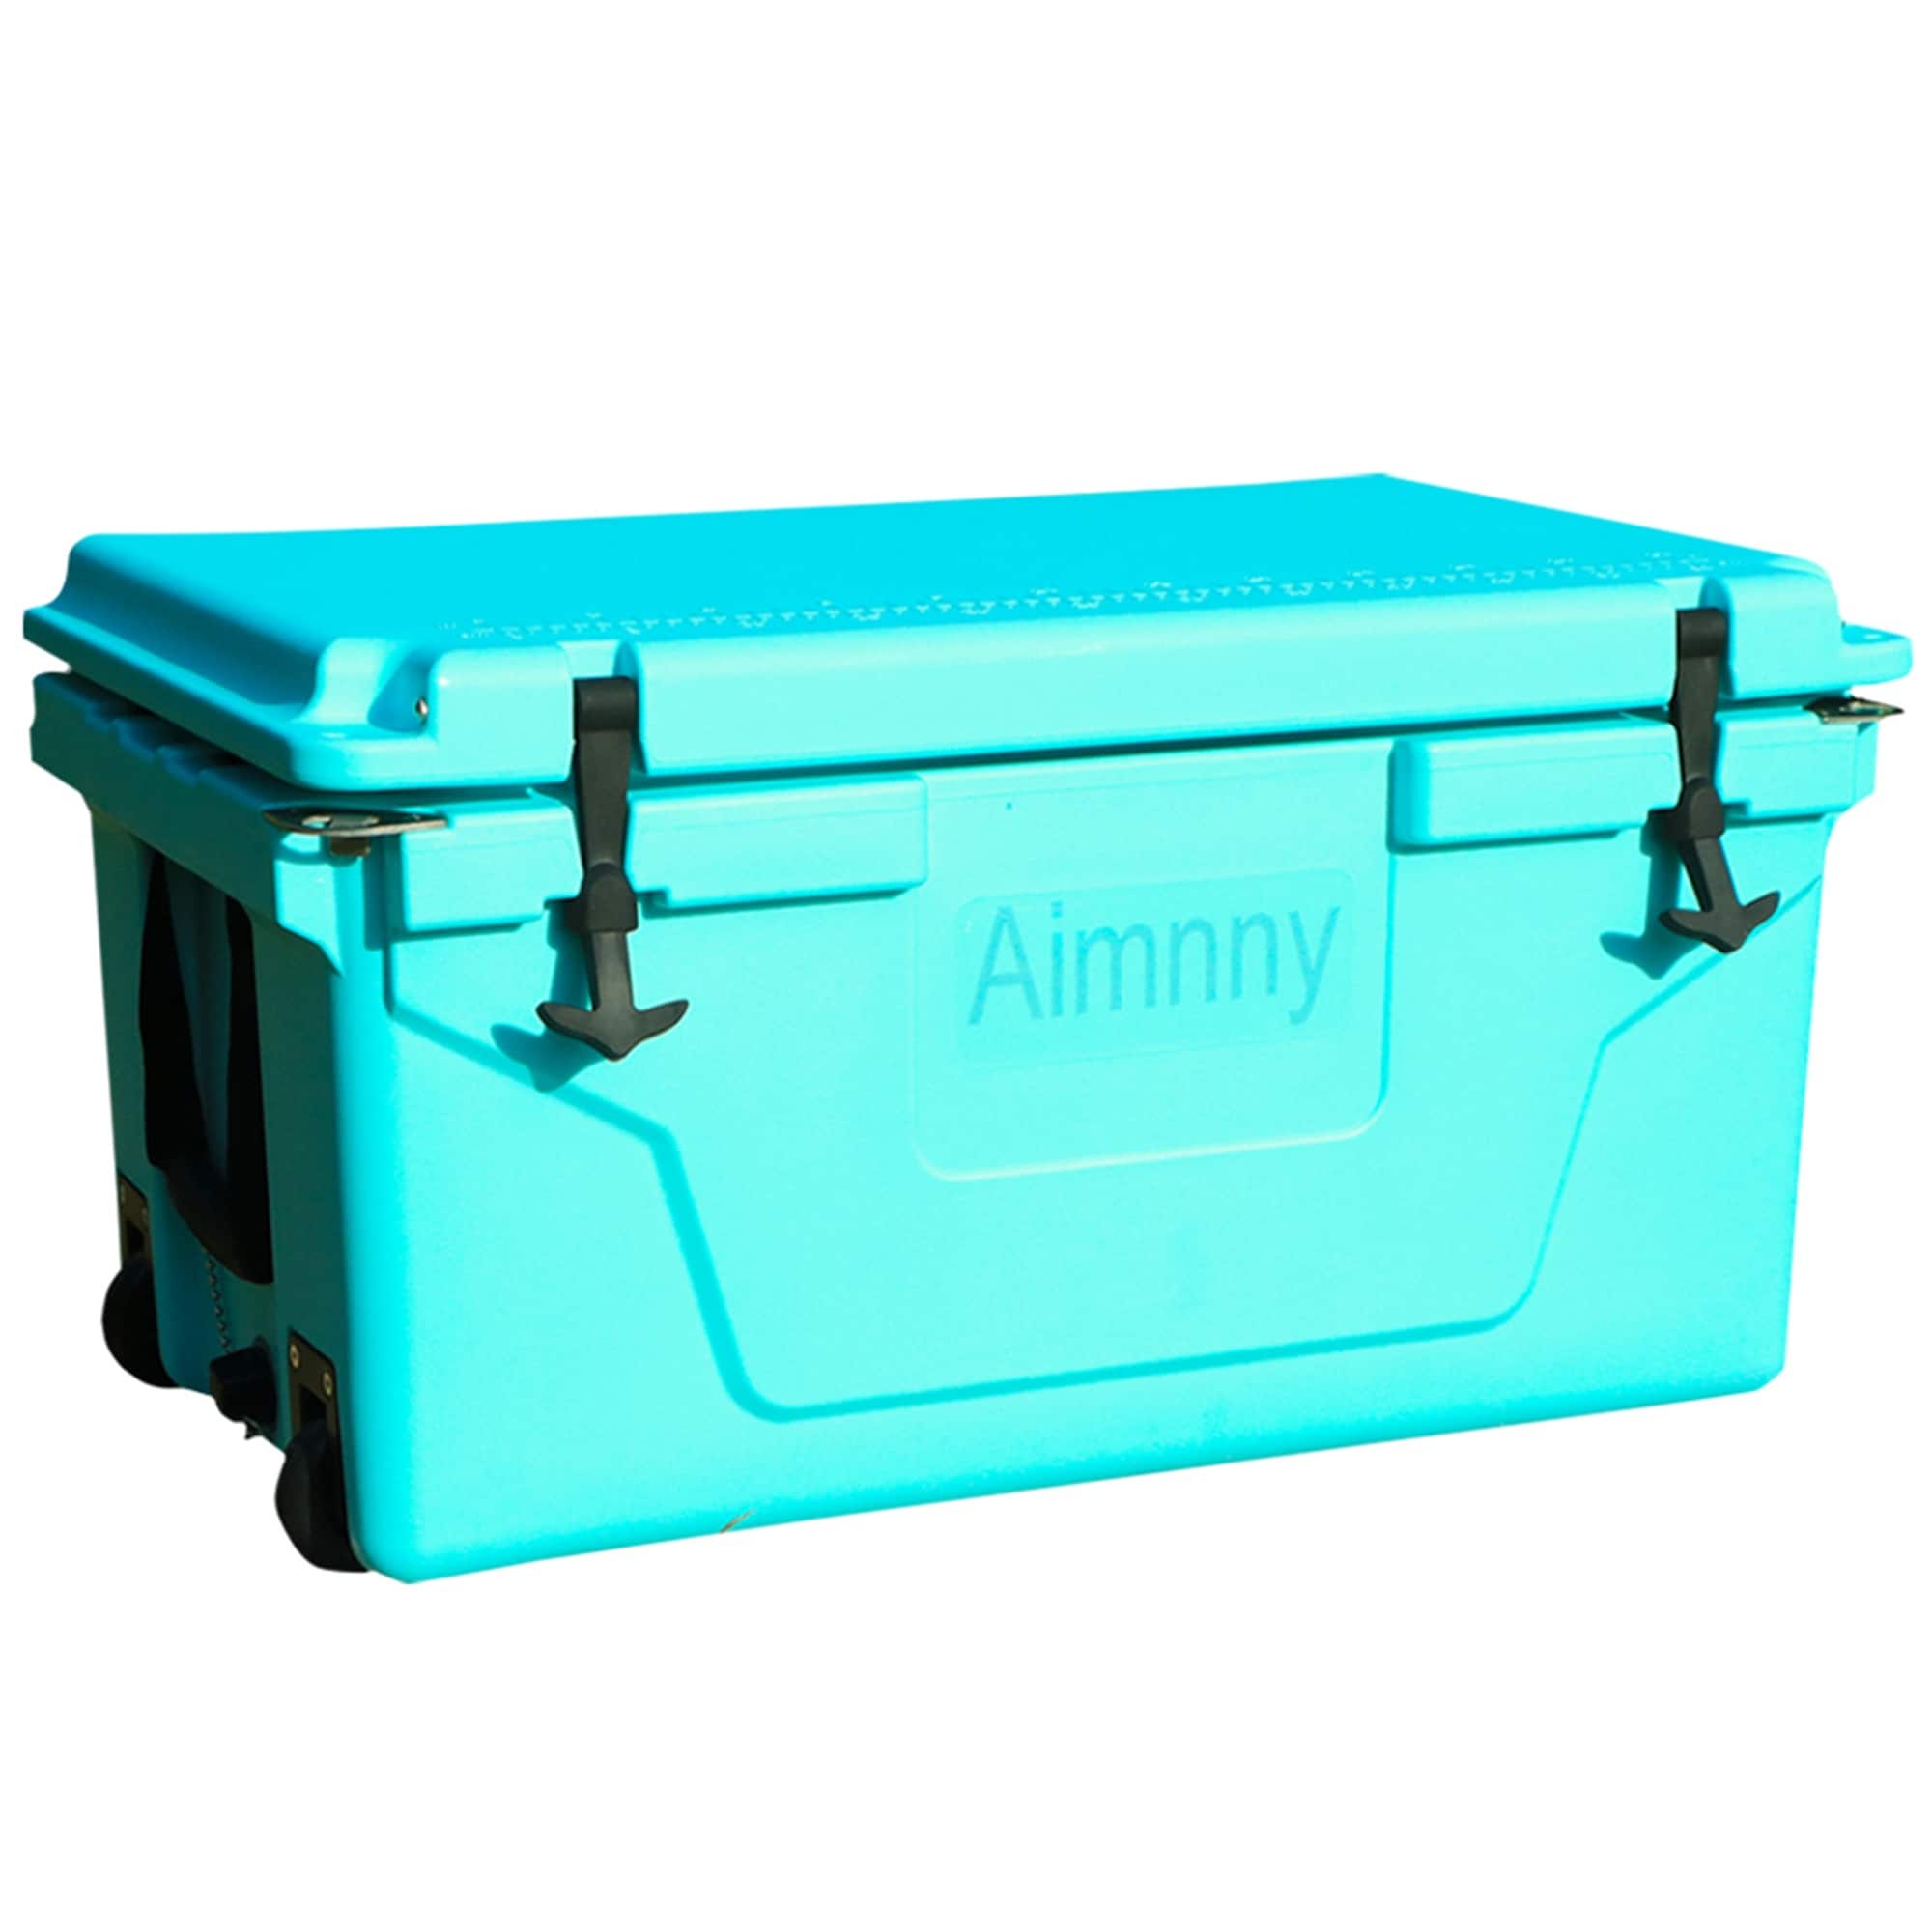 Outdoor Camping Portable Ice Cooler Box Fishing Ice Chest Box - Blue